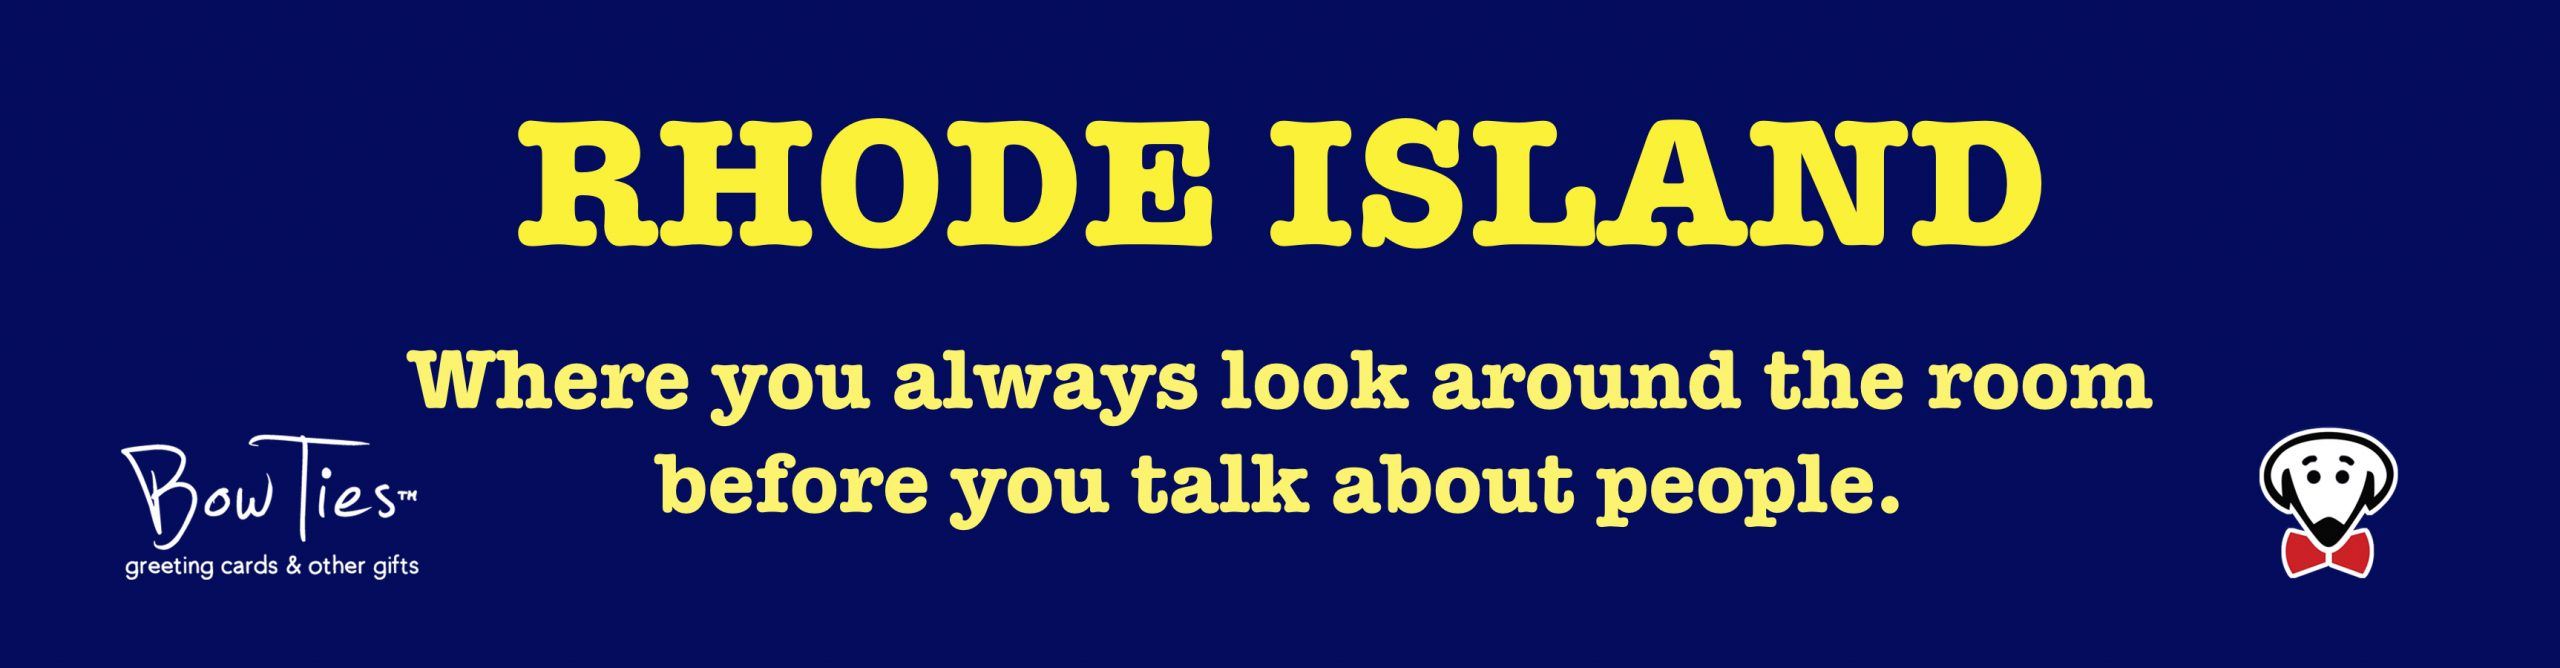 RHODE ISLAND Where you always look around the room before you talk about people. – sticker